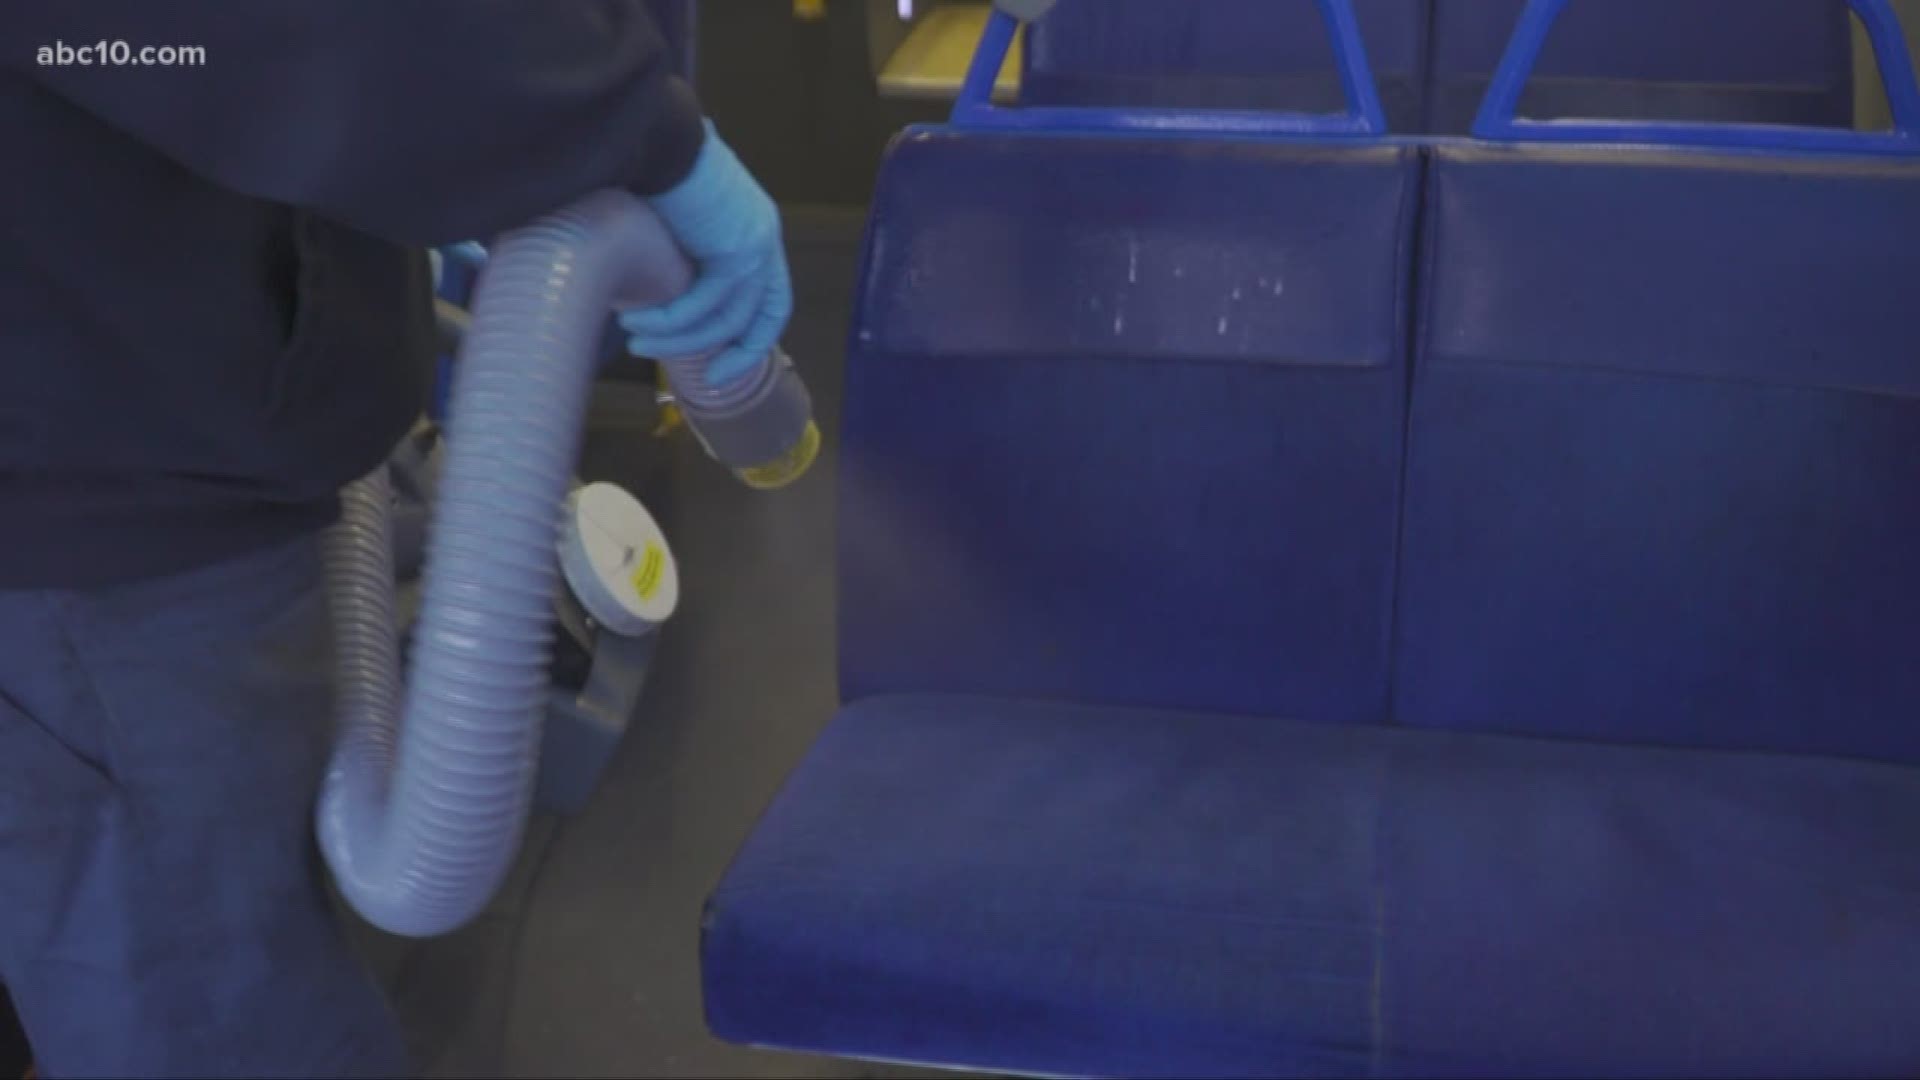 SacRT's typical cleaning process during cold and flu season is done every three weeks; the transportation agency is increasing that frequency to once a week.